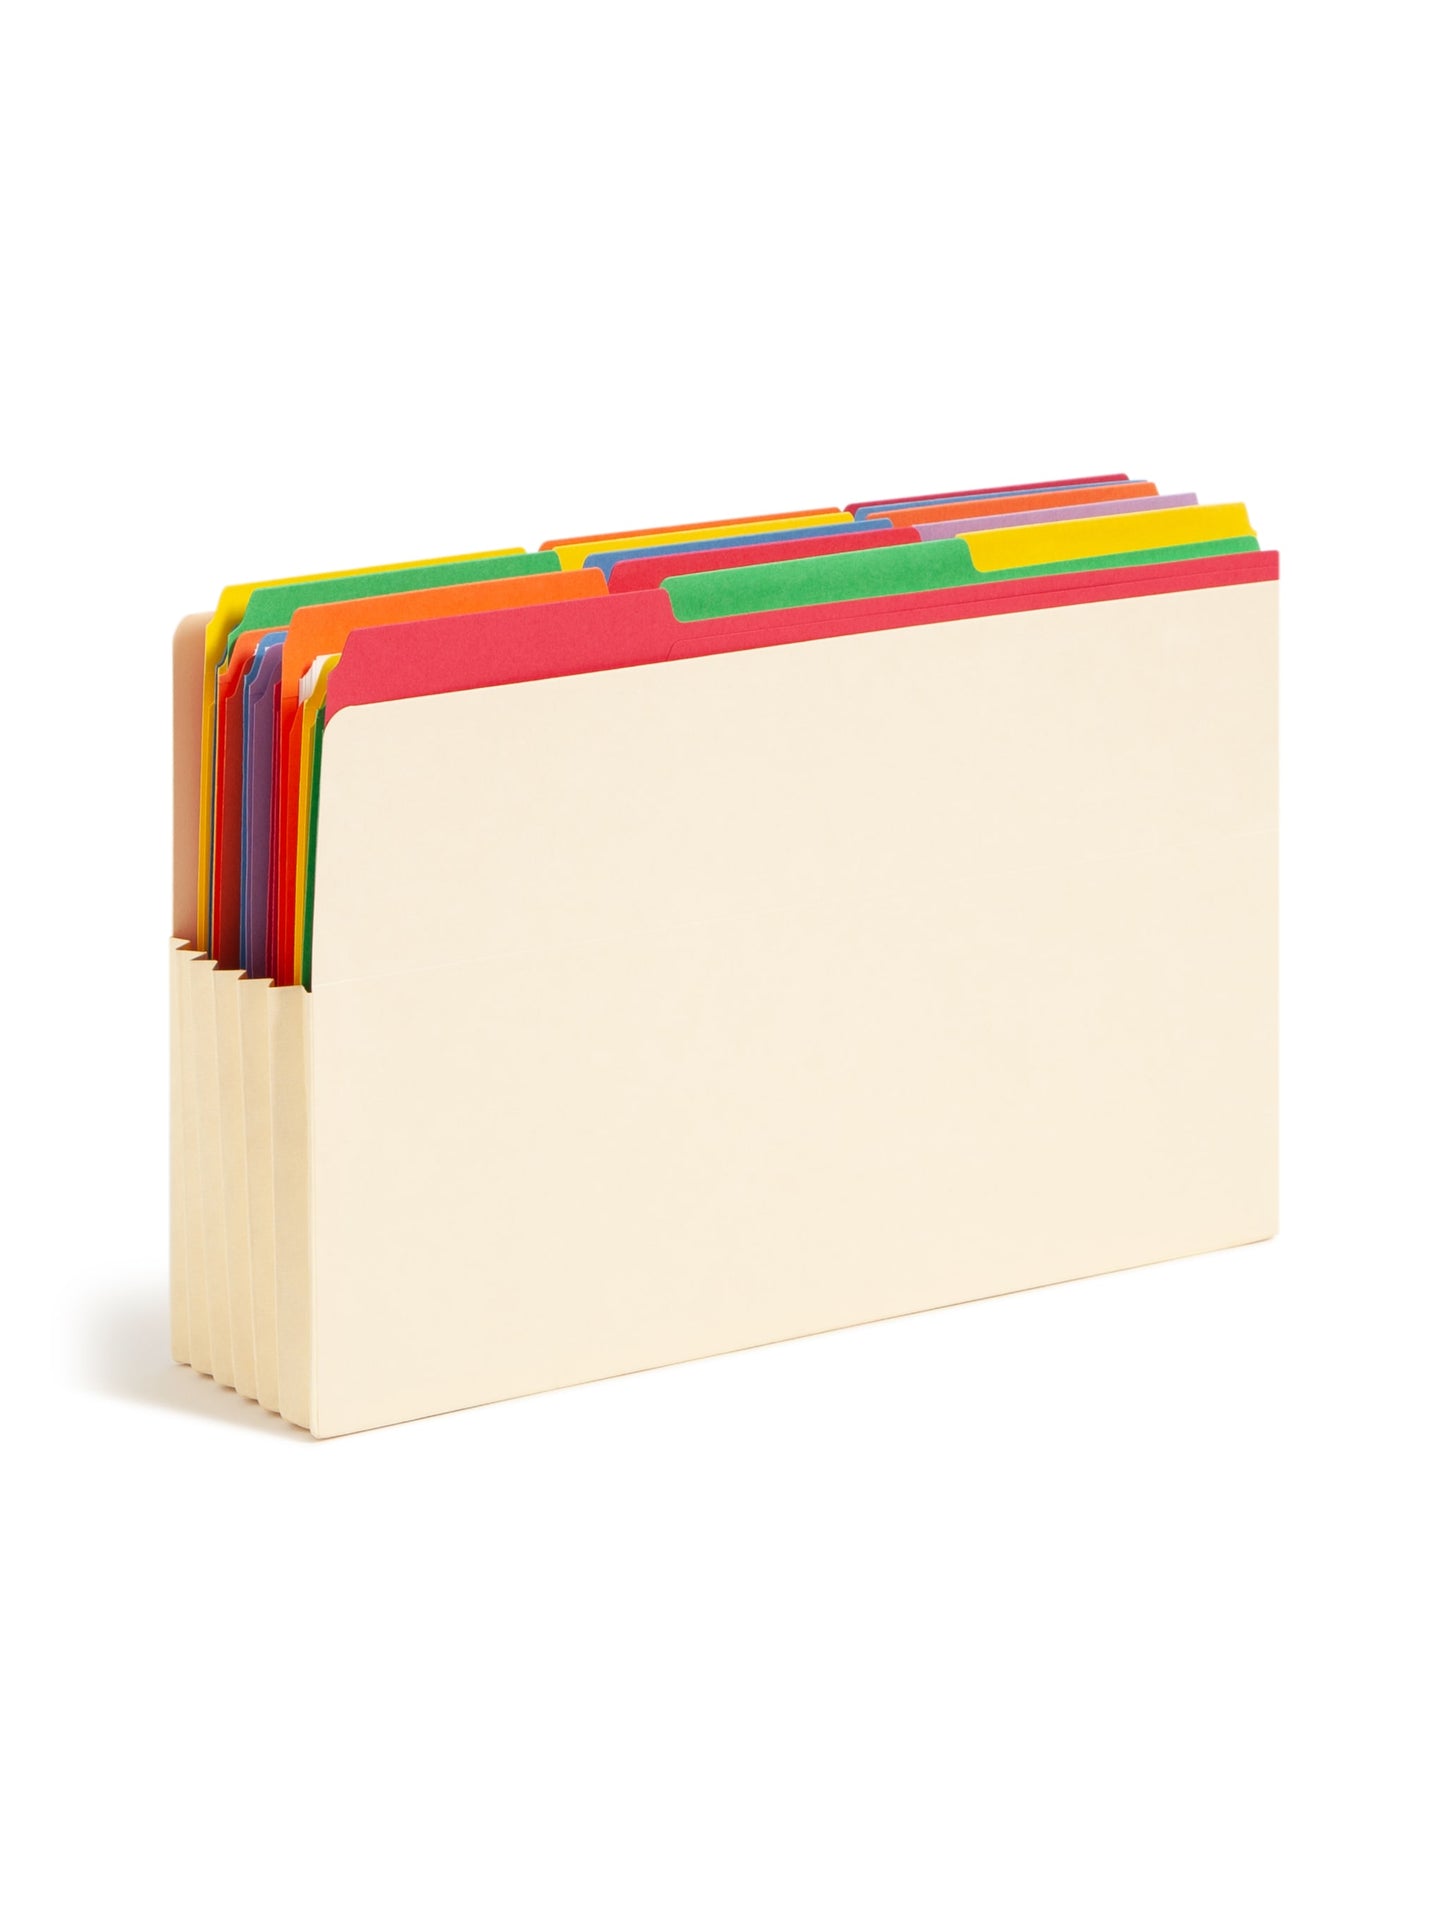 Reinforced End Tab File Pockets, Straight-Cut Tab, 5-1/4 inch Expansion, Manila Color, Legal Size, Set of 0, 30086486761742